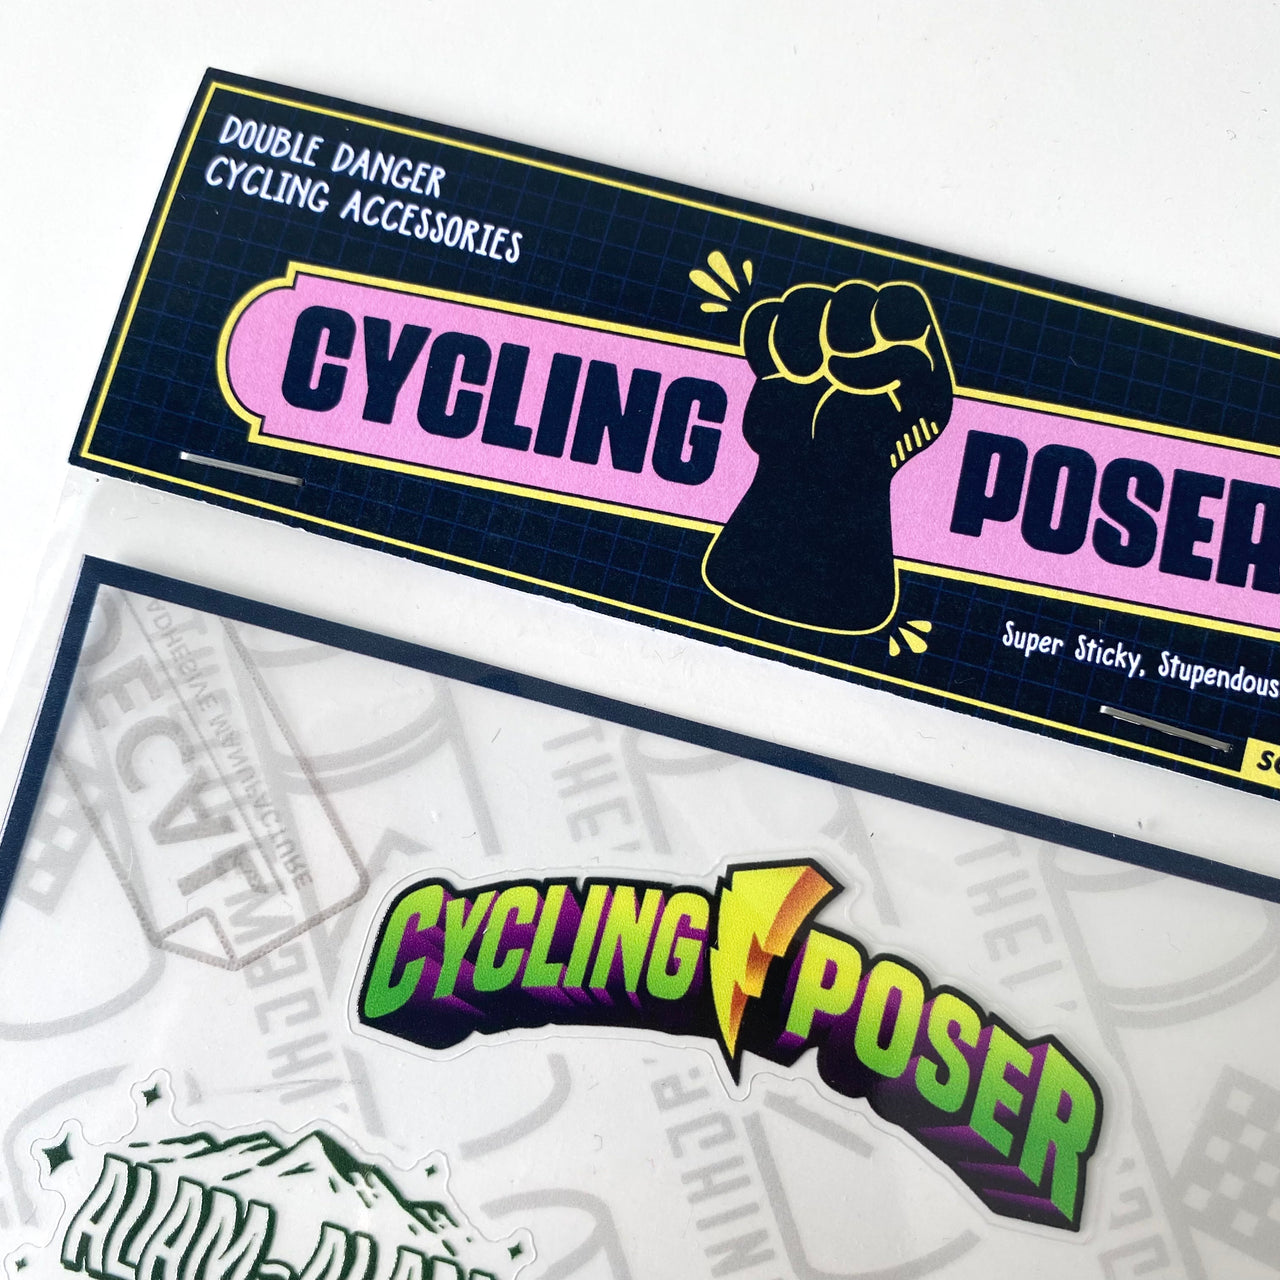 A-Sticker-Sheet by Cycling Poser